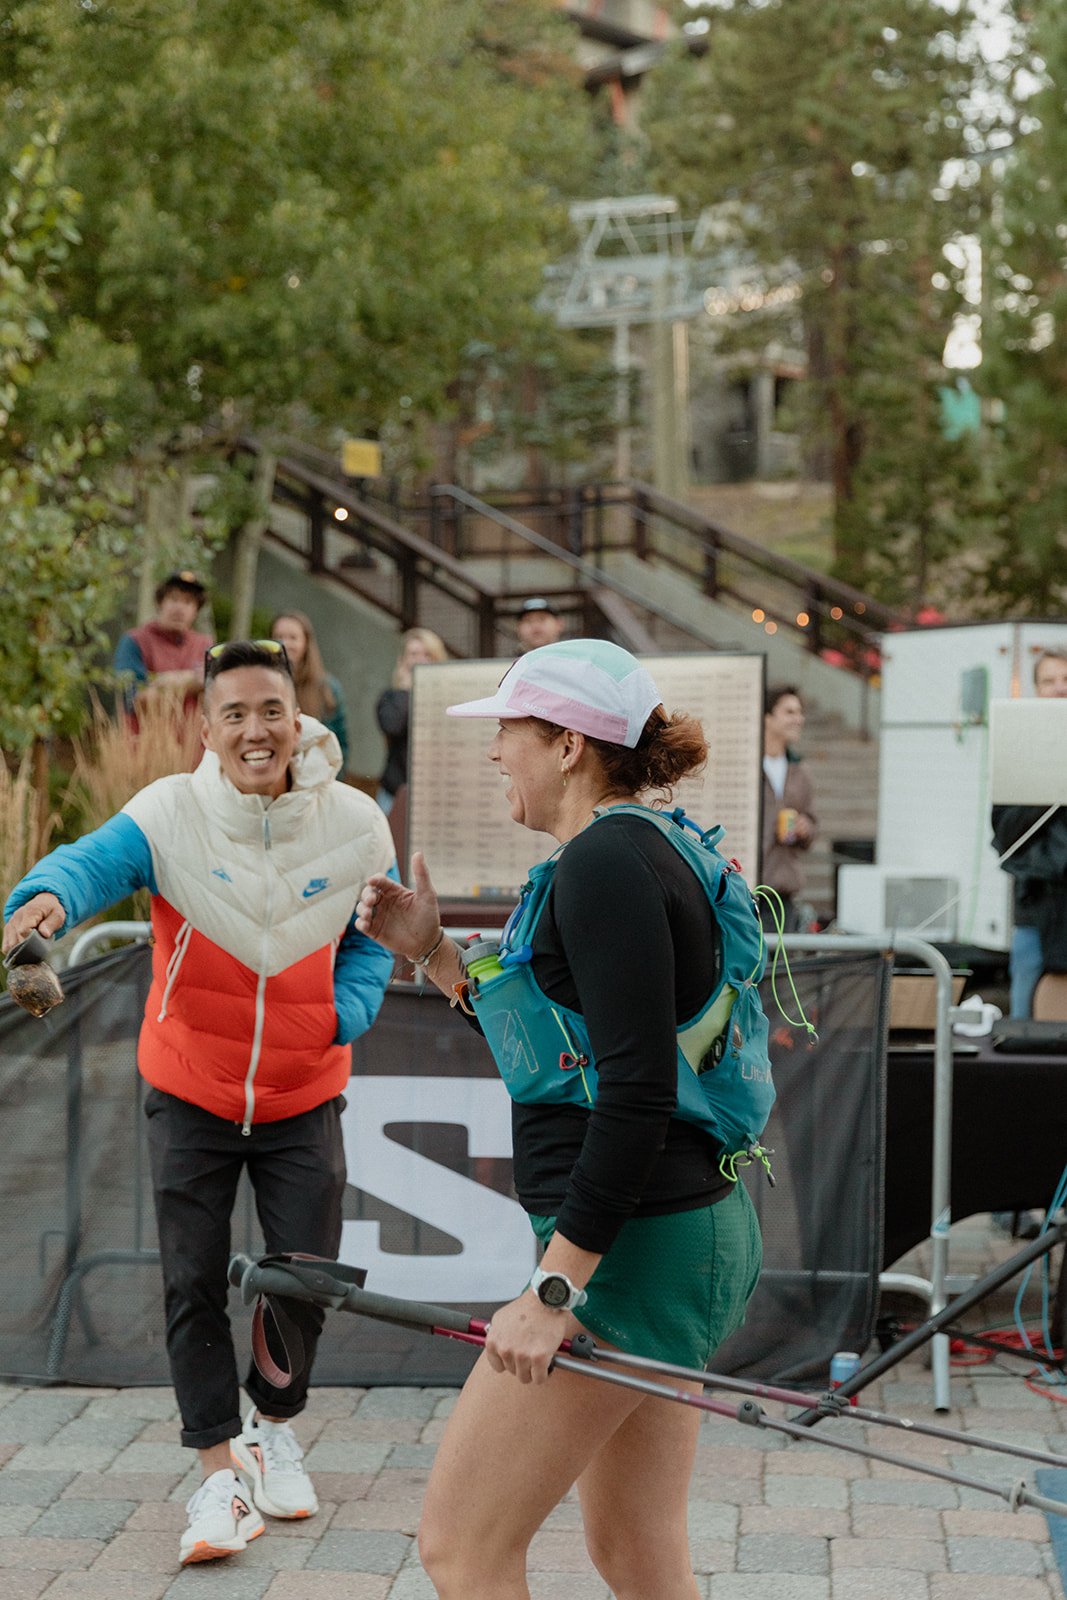 A female runner smiling as she finishes mammoth trail fest, billy yang handing out medals